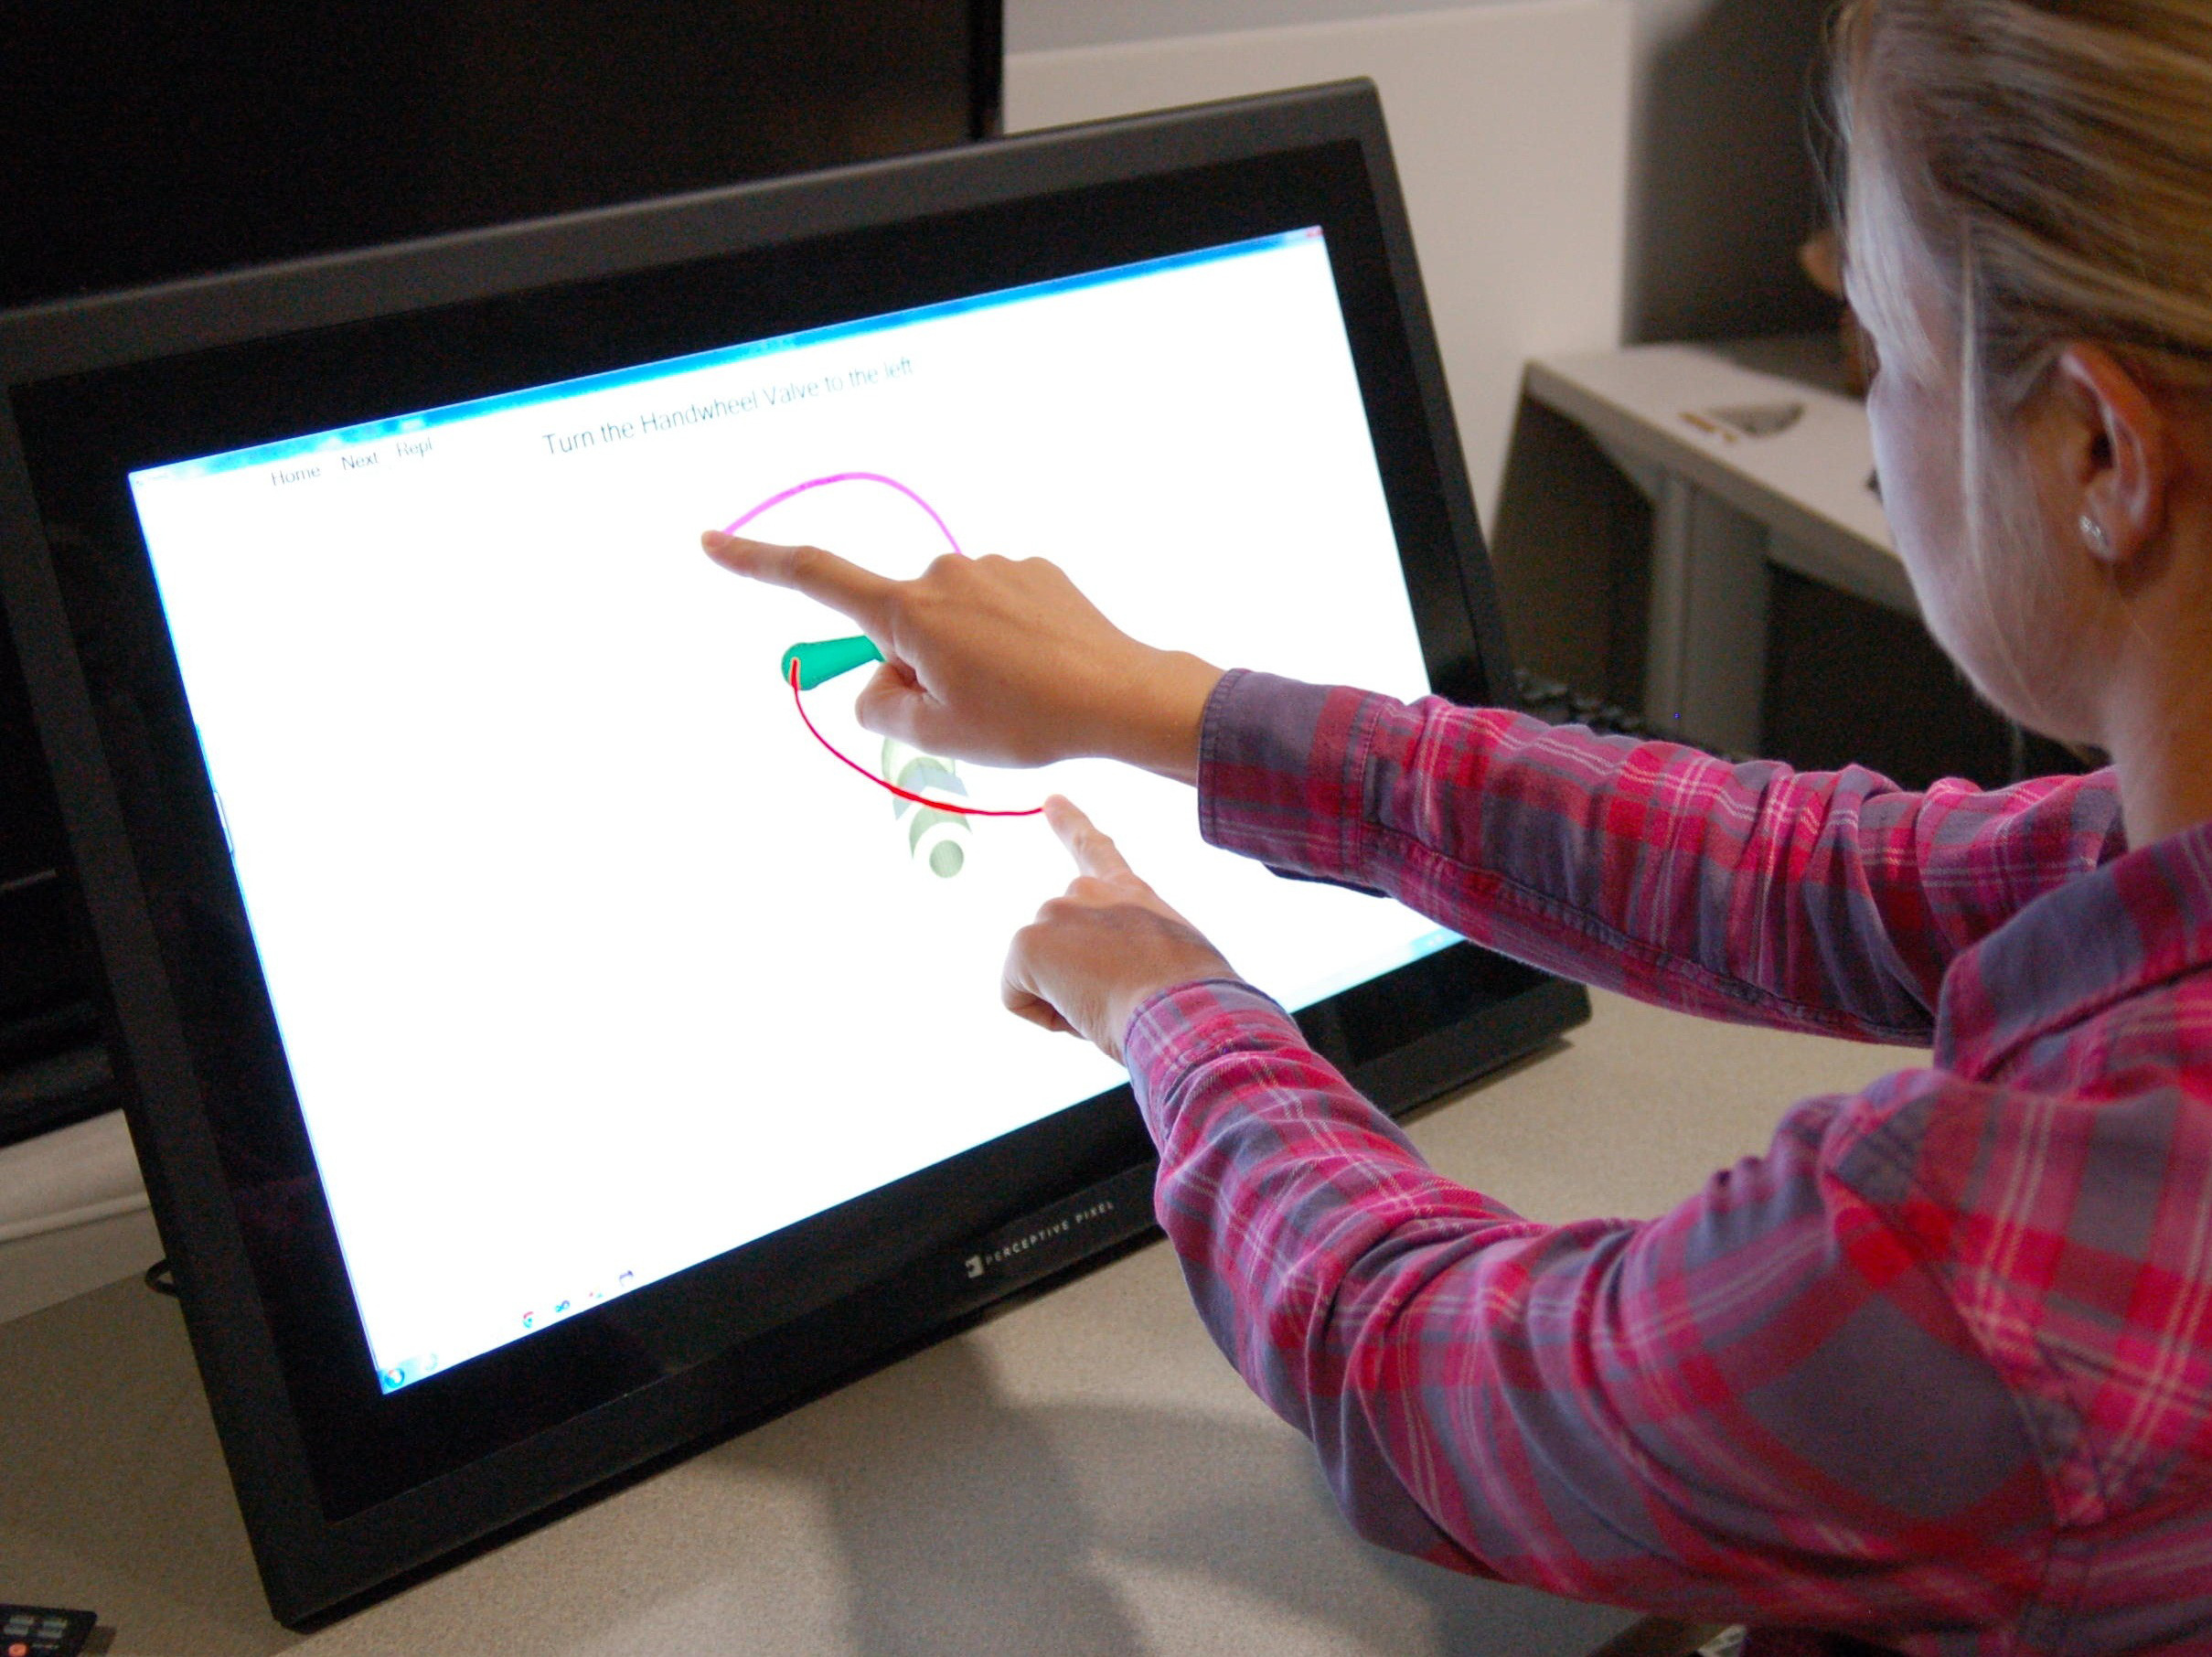 Multi-touch display